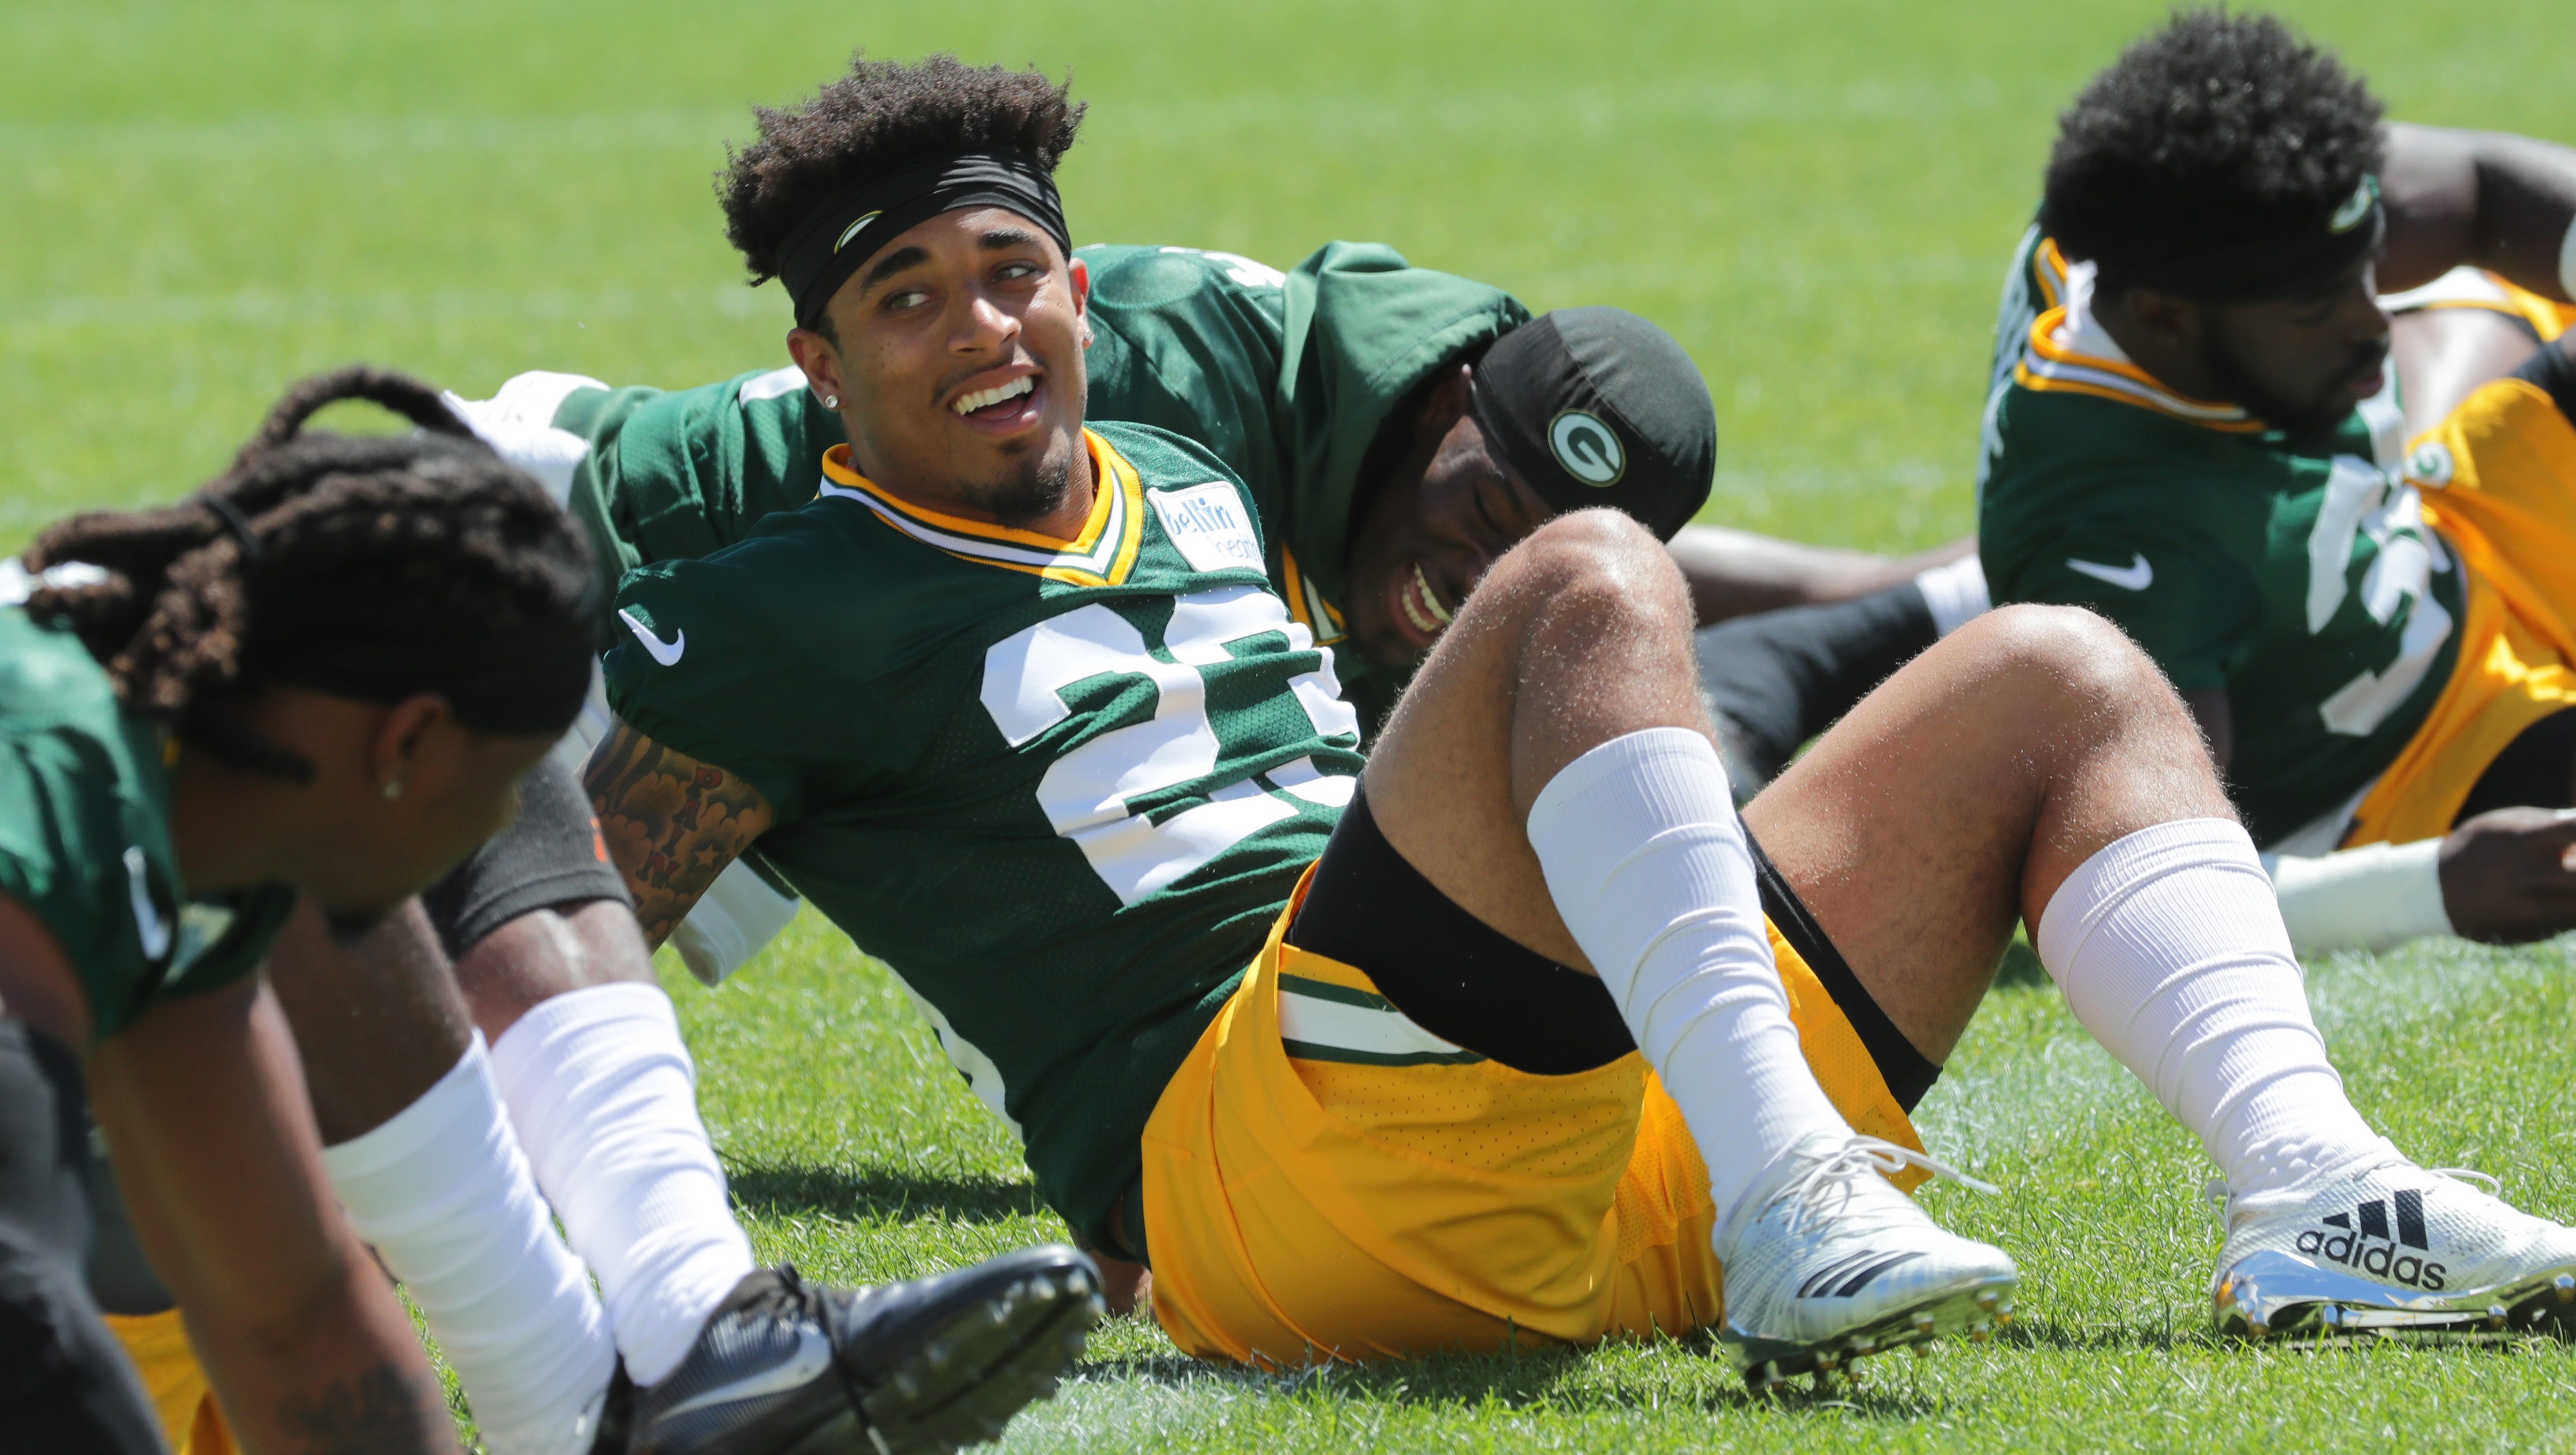 Green Bay Packers cornerback Jaire Alexander (23) is shown during the final day of the team's three-day mini-camp Wednesday, June 13, 2018 in Green Bay, Wis.